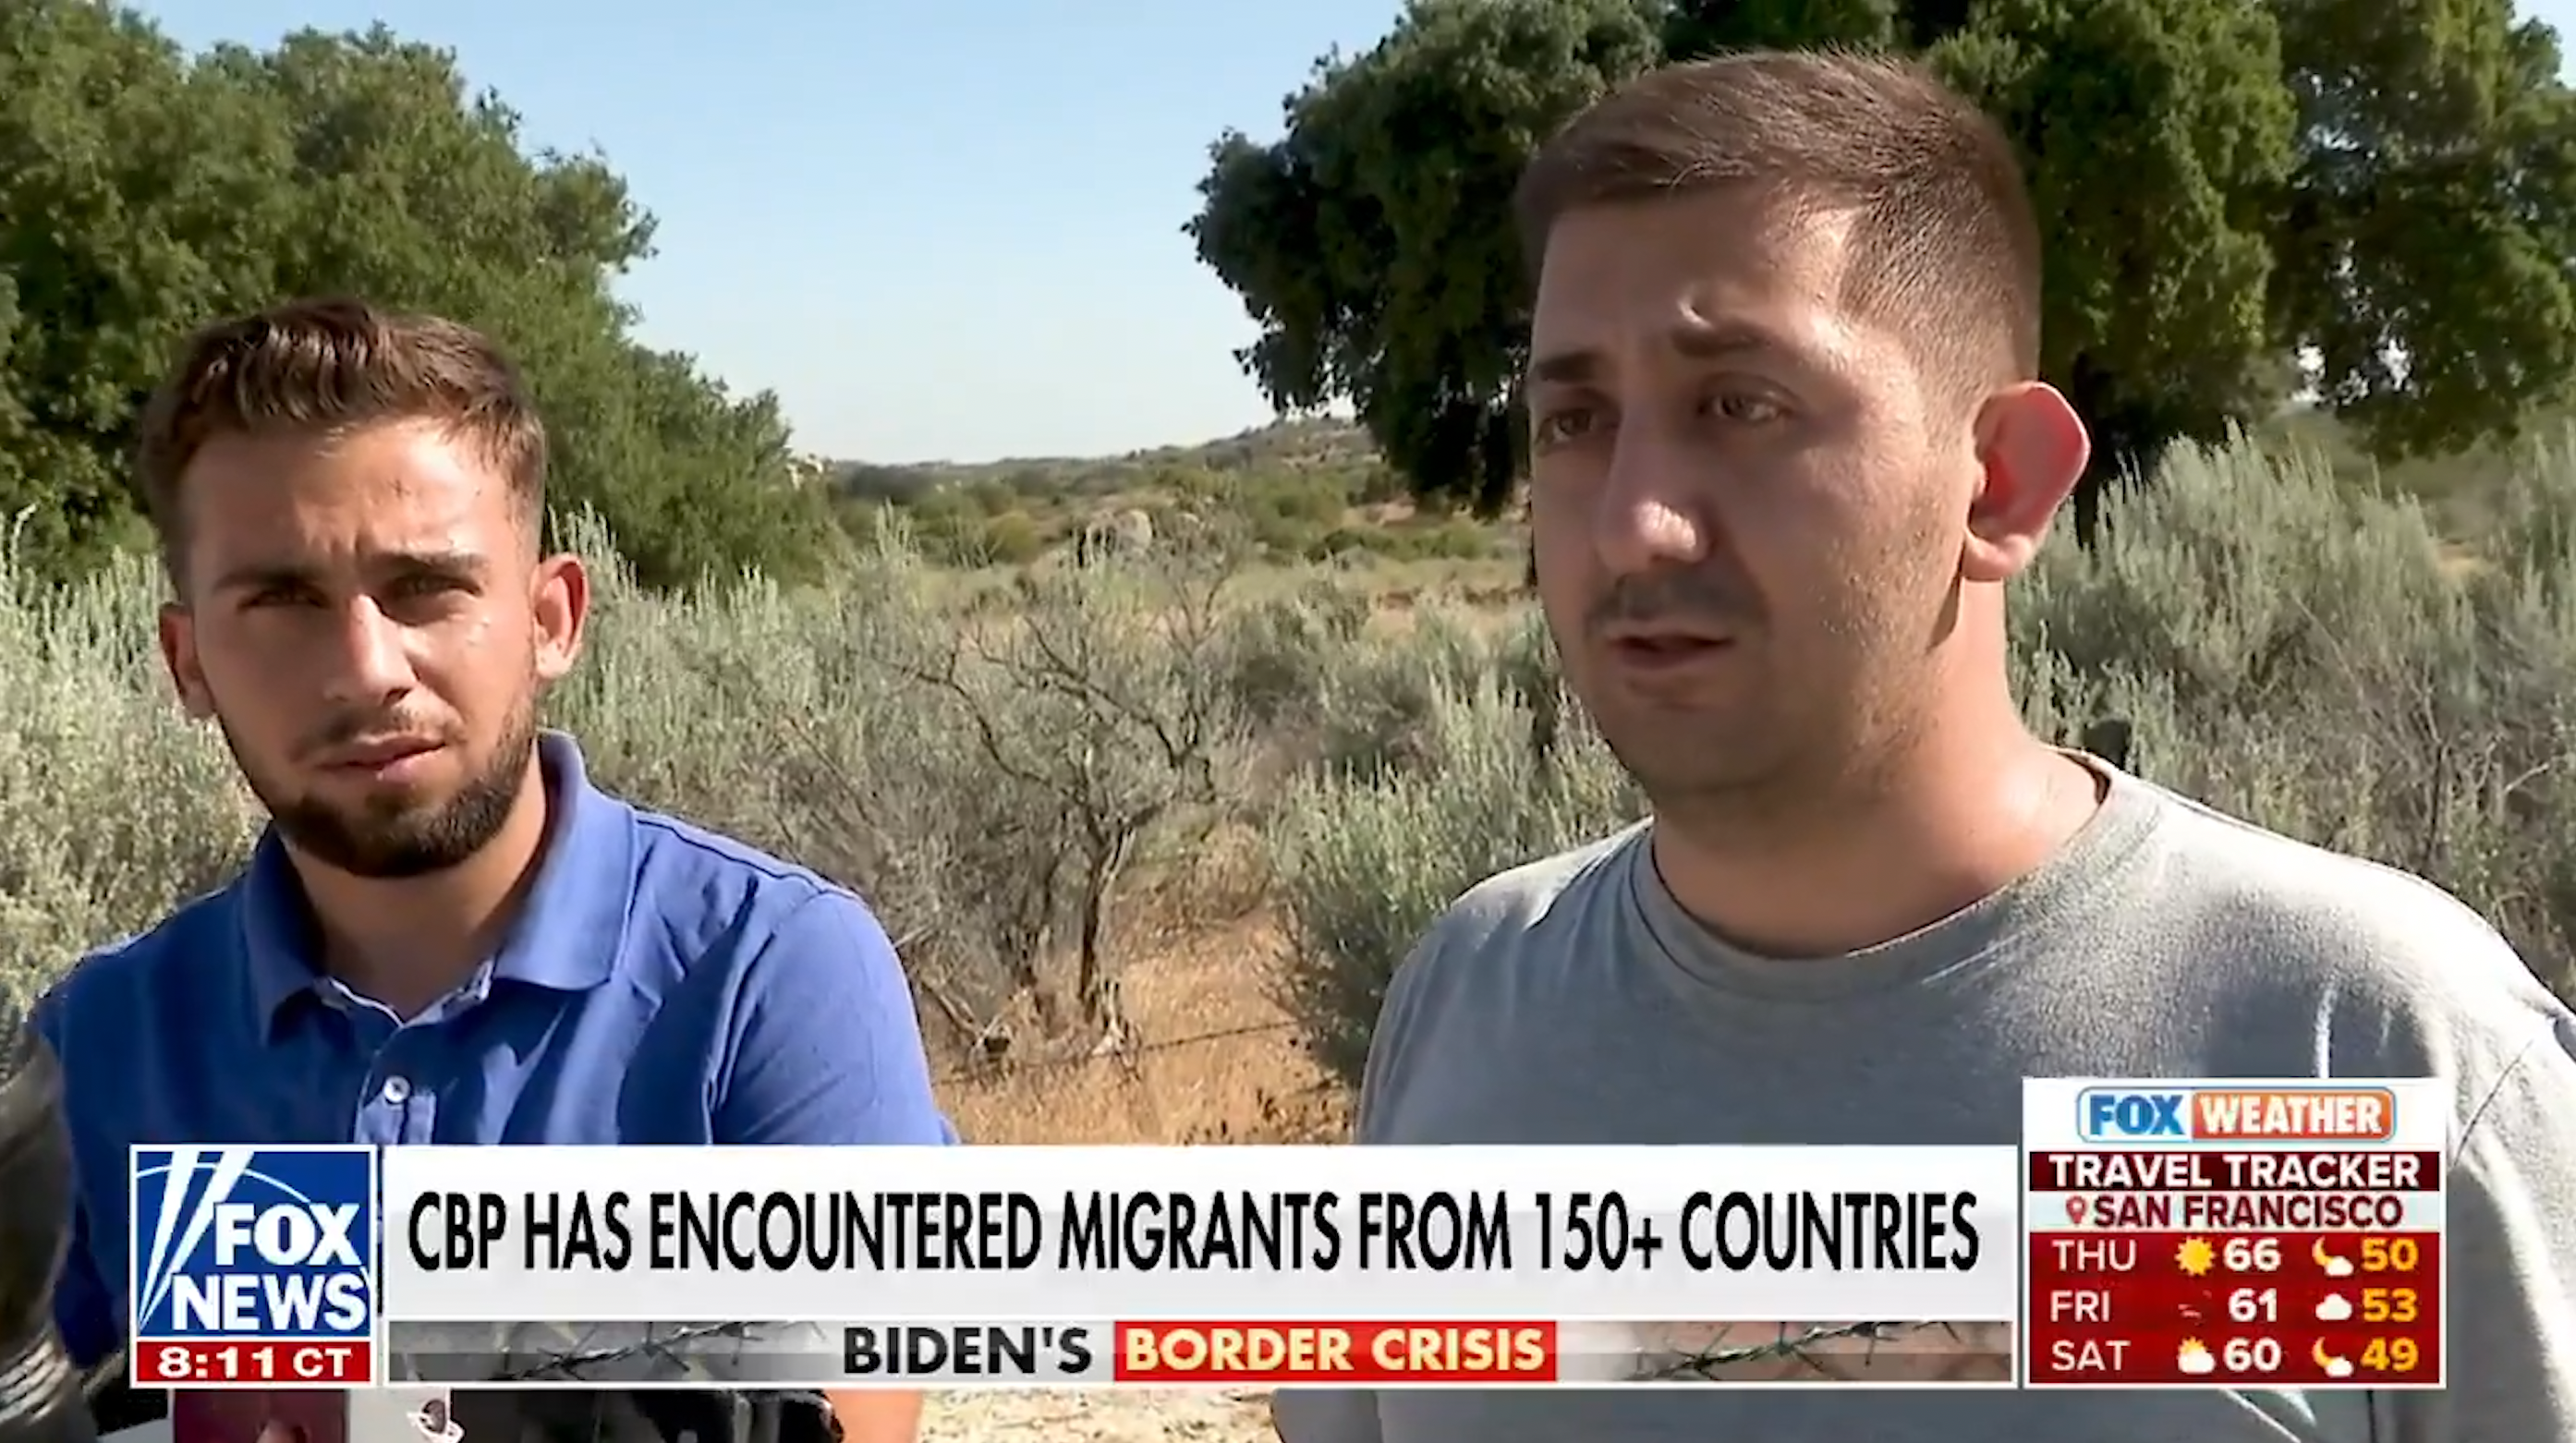 Video: Man ‘Illegally’ Entering U.S. Raises Concerns About Border Security